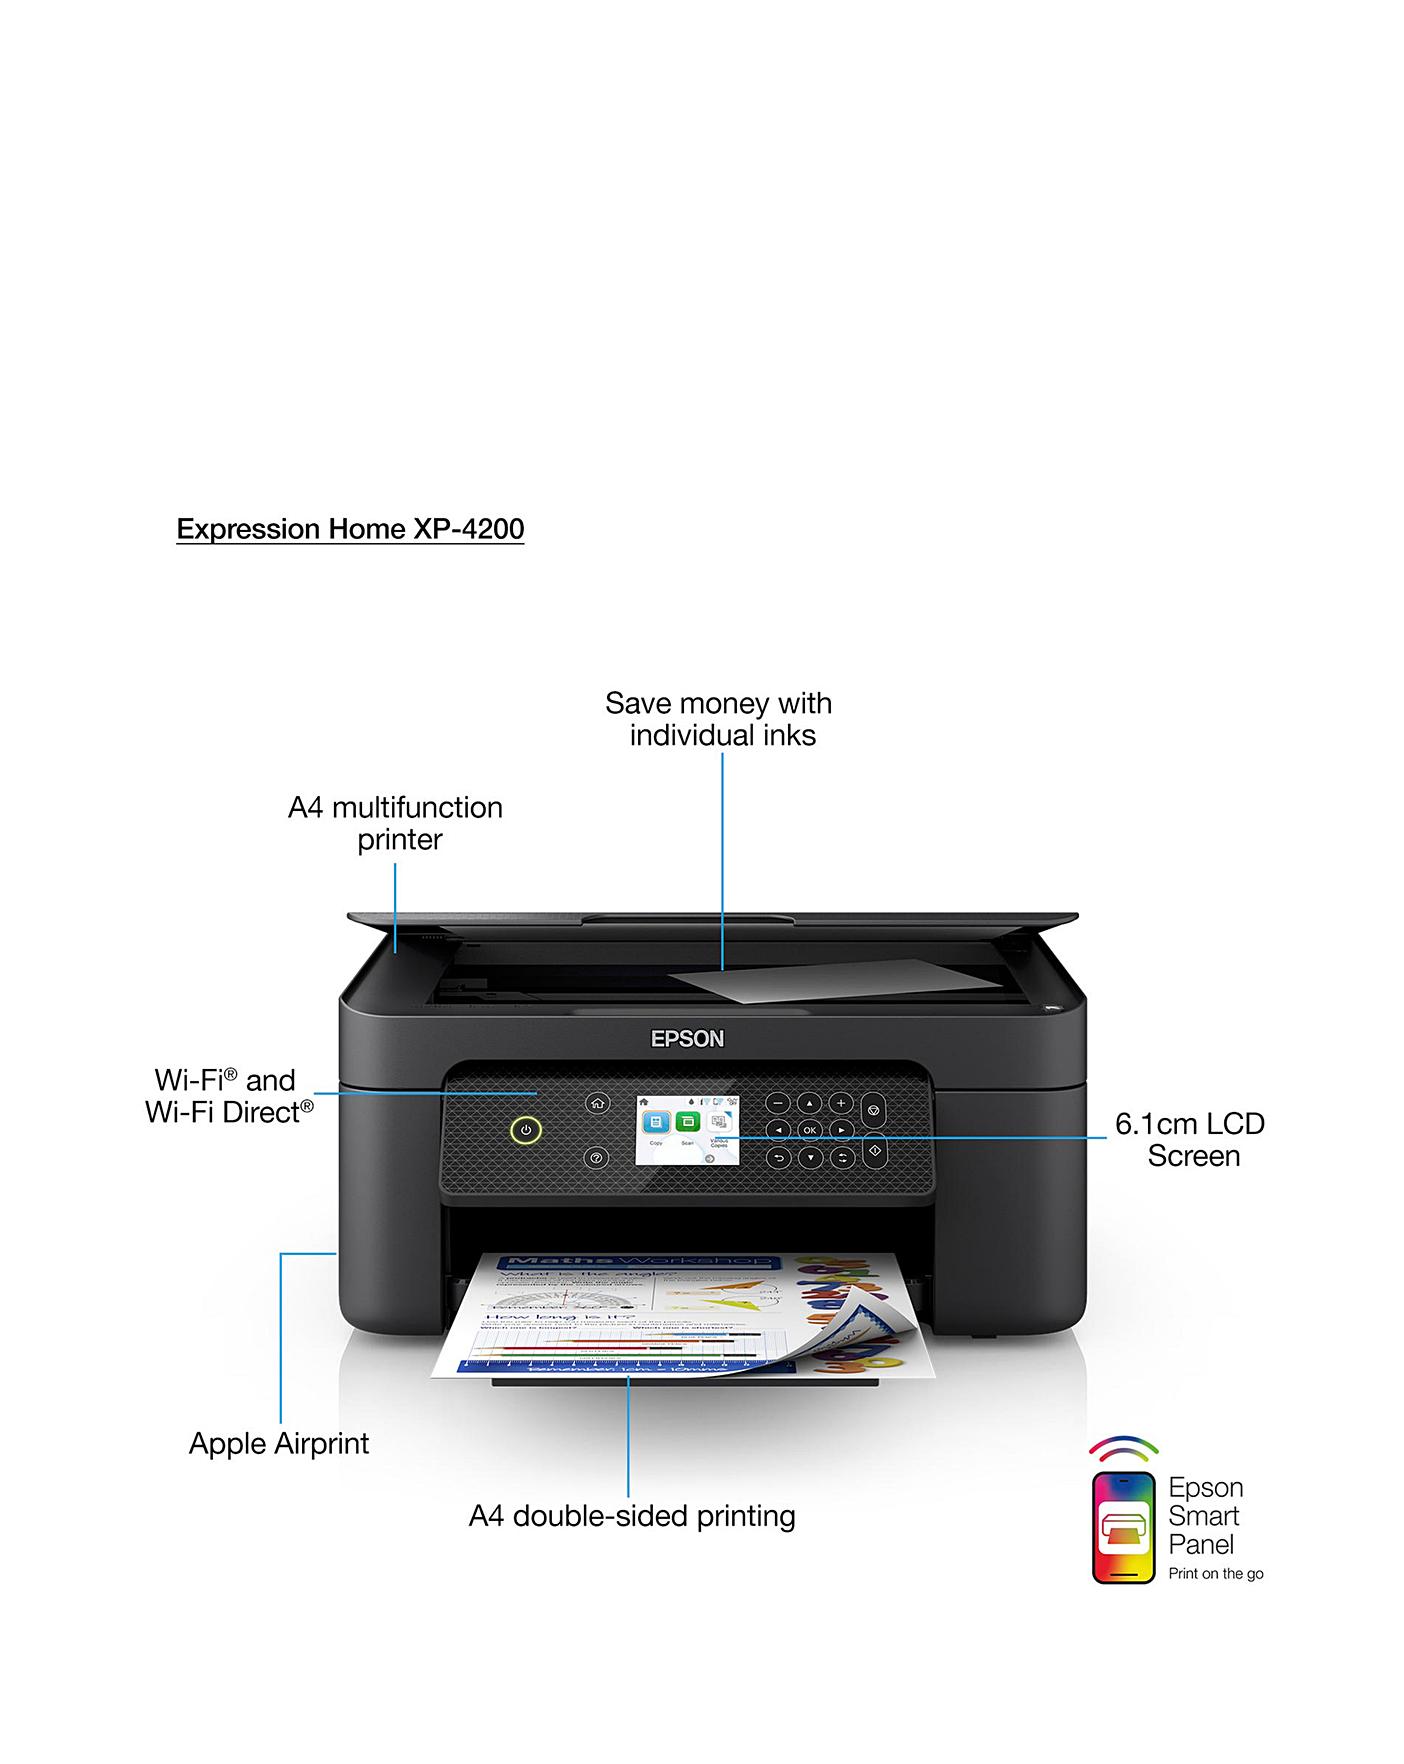 REVIEW of the Epson Expression Home XP-4200 Printer 